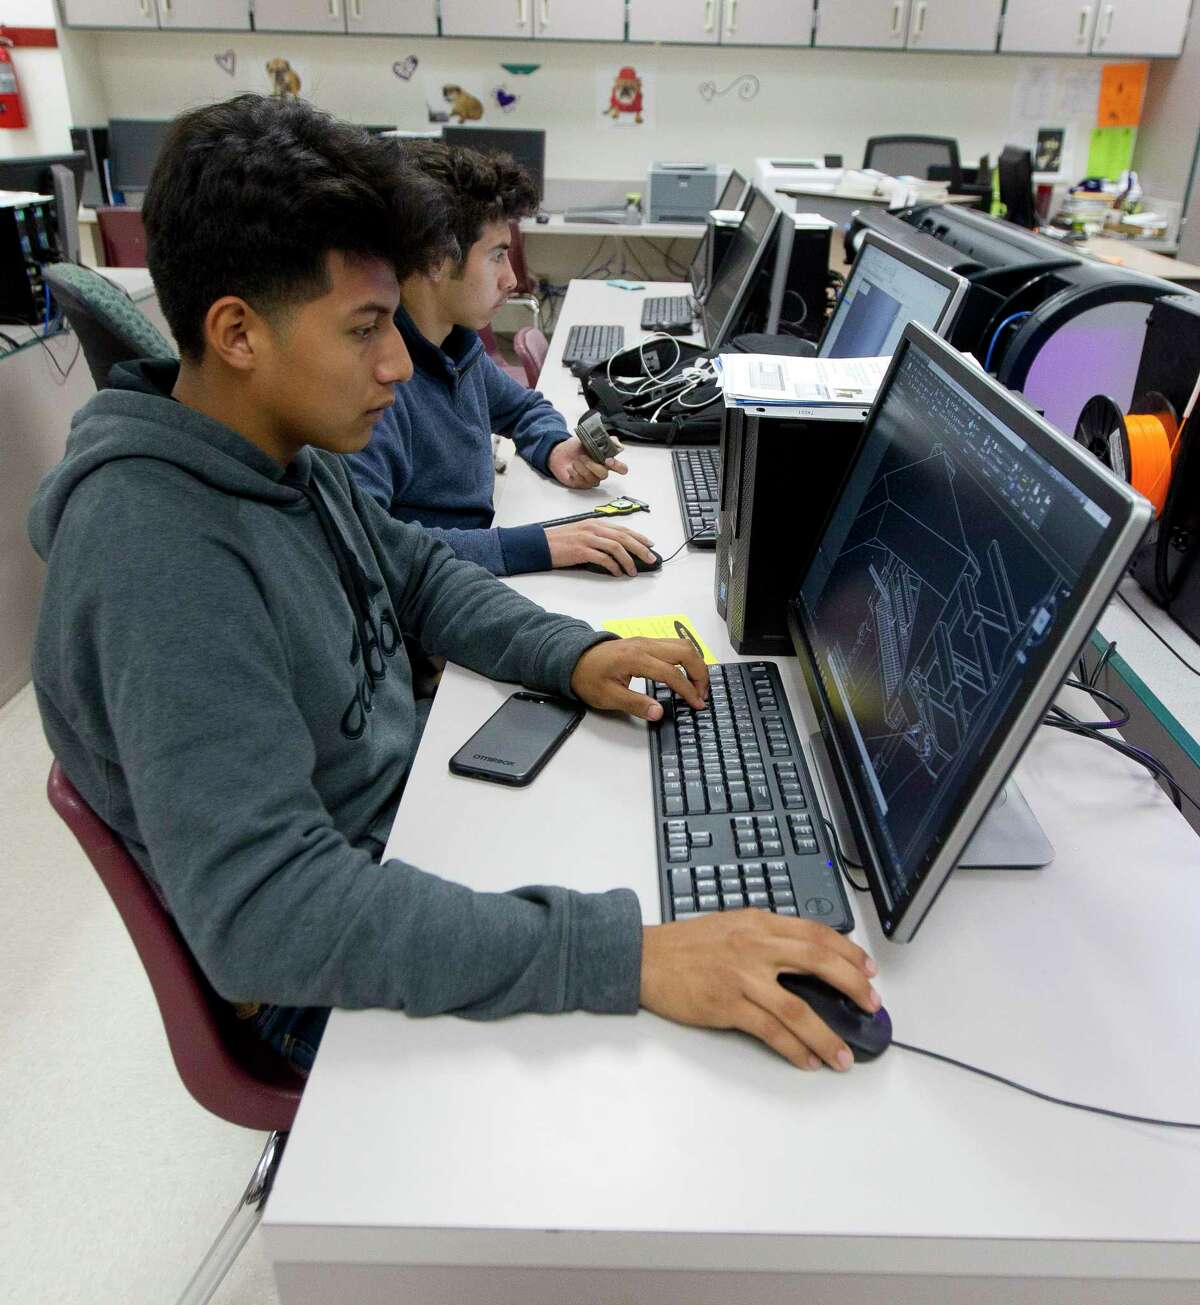 Willis High School senior Marco Gonzalez, 17, works on an AutoCAD project at Willis High School Wednesday, March 1, 2017, in Willis. Willis seniors Gonzalez and fellow senior Gabriel Ramire are preparing to take their engineering certification test as part of the districtÂ?’s engineering class. Willis ISD plans to open a $39.4 million Career and Technology Education building as part of the $109.5 million bond pass in November 2015.